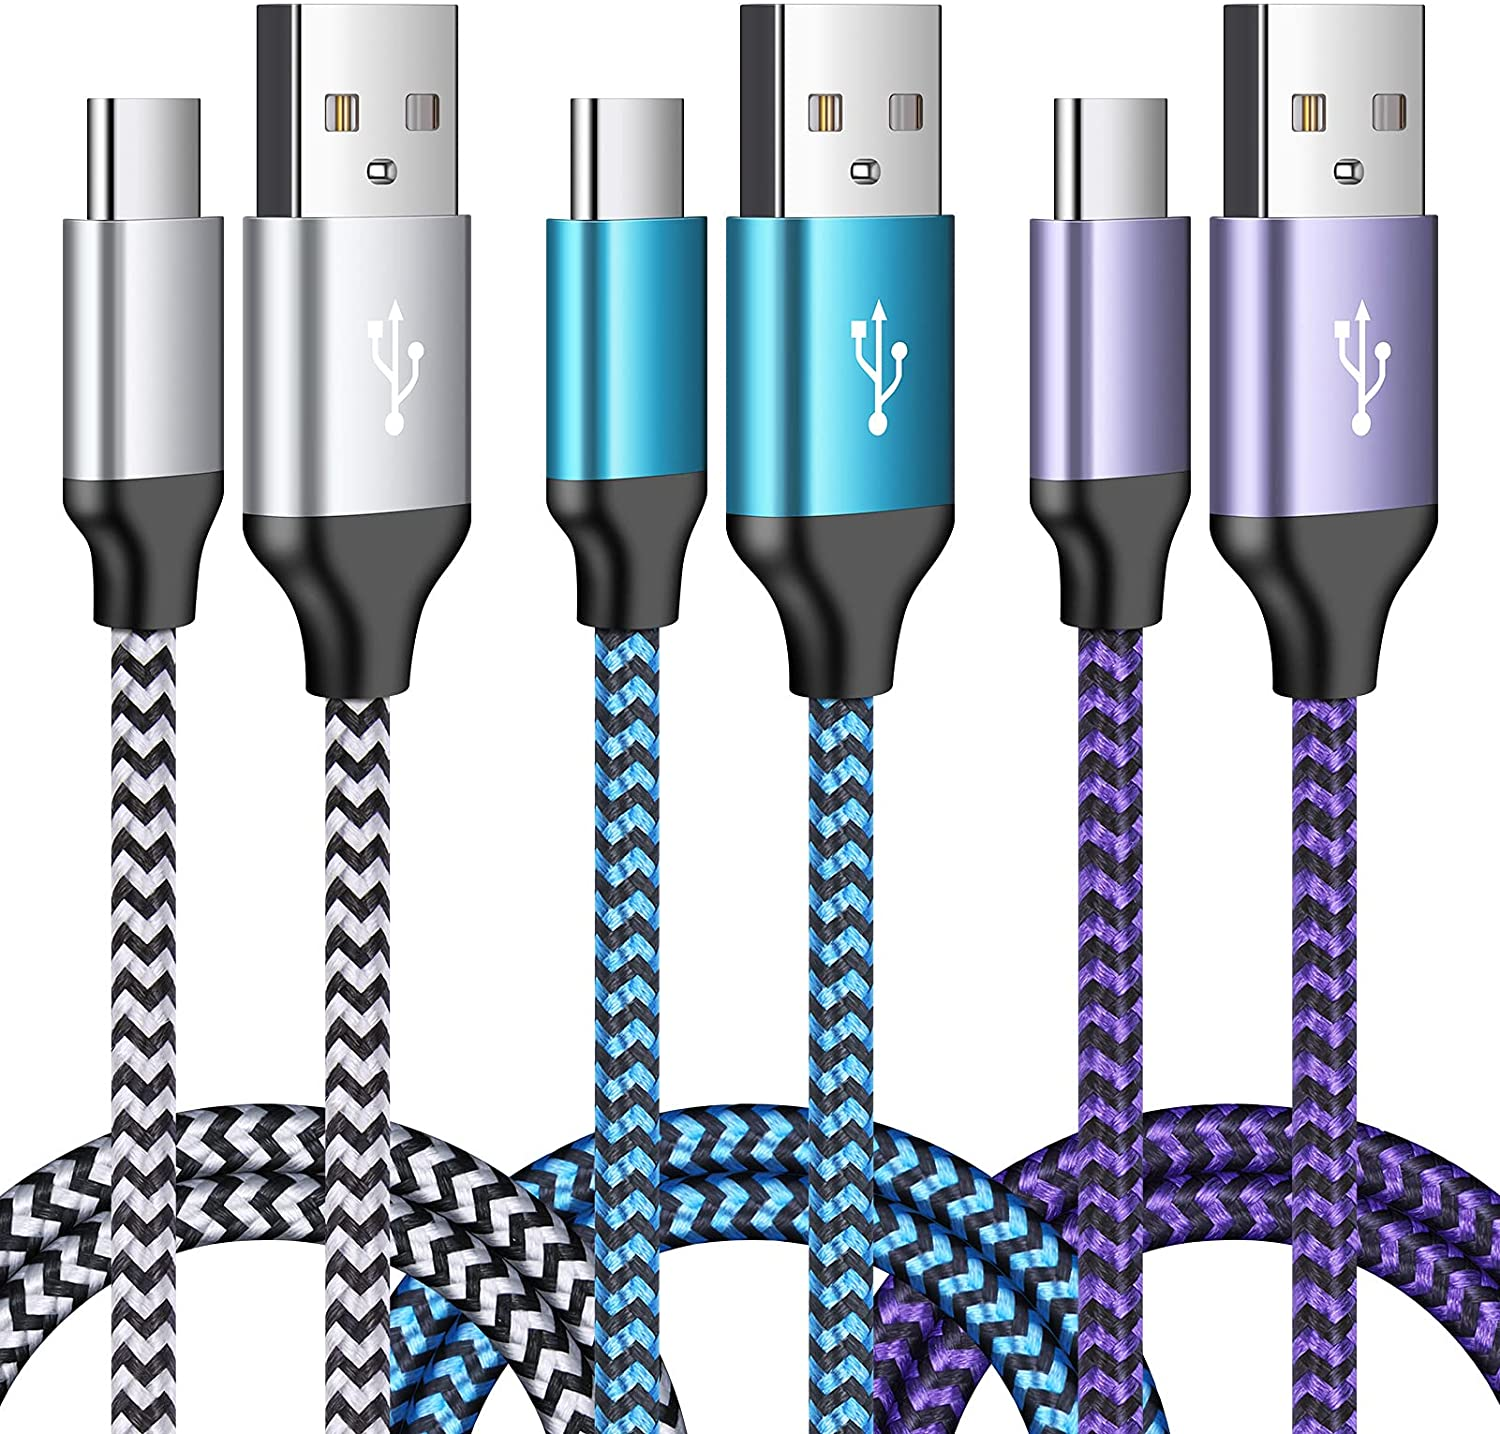 3 Pack 3FT Type C Charging Cable USB C Fast Charging Cord for Google Pixel 5 4A5G 4Xl;Samsung Galaxy S21,S10+,S20 FE,A02 S,A52,A42,A12,A72,S20,Note 20,10;Moto G100 G30,Edge 20 Android Charging Cable 